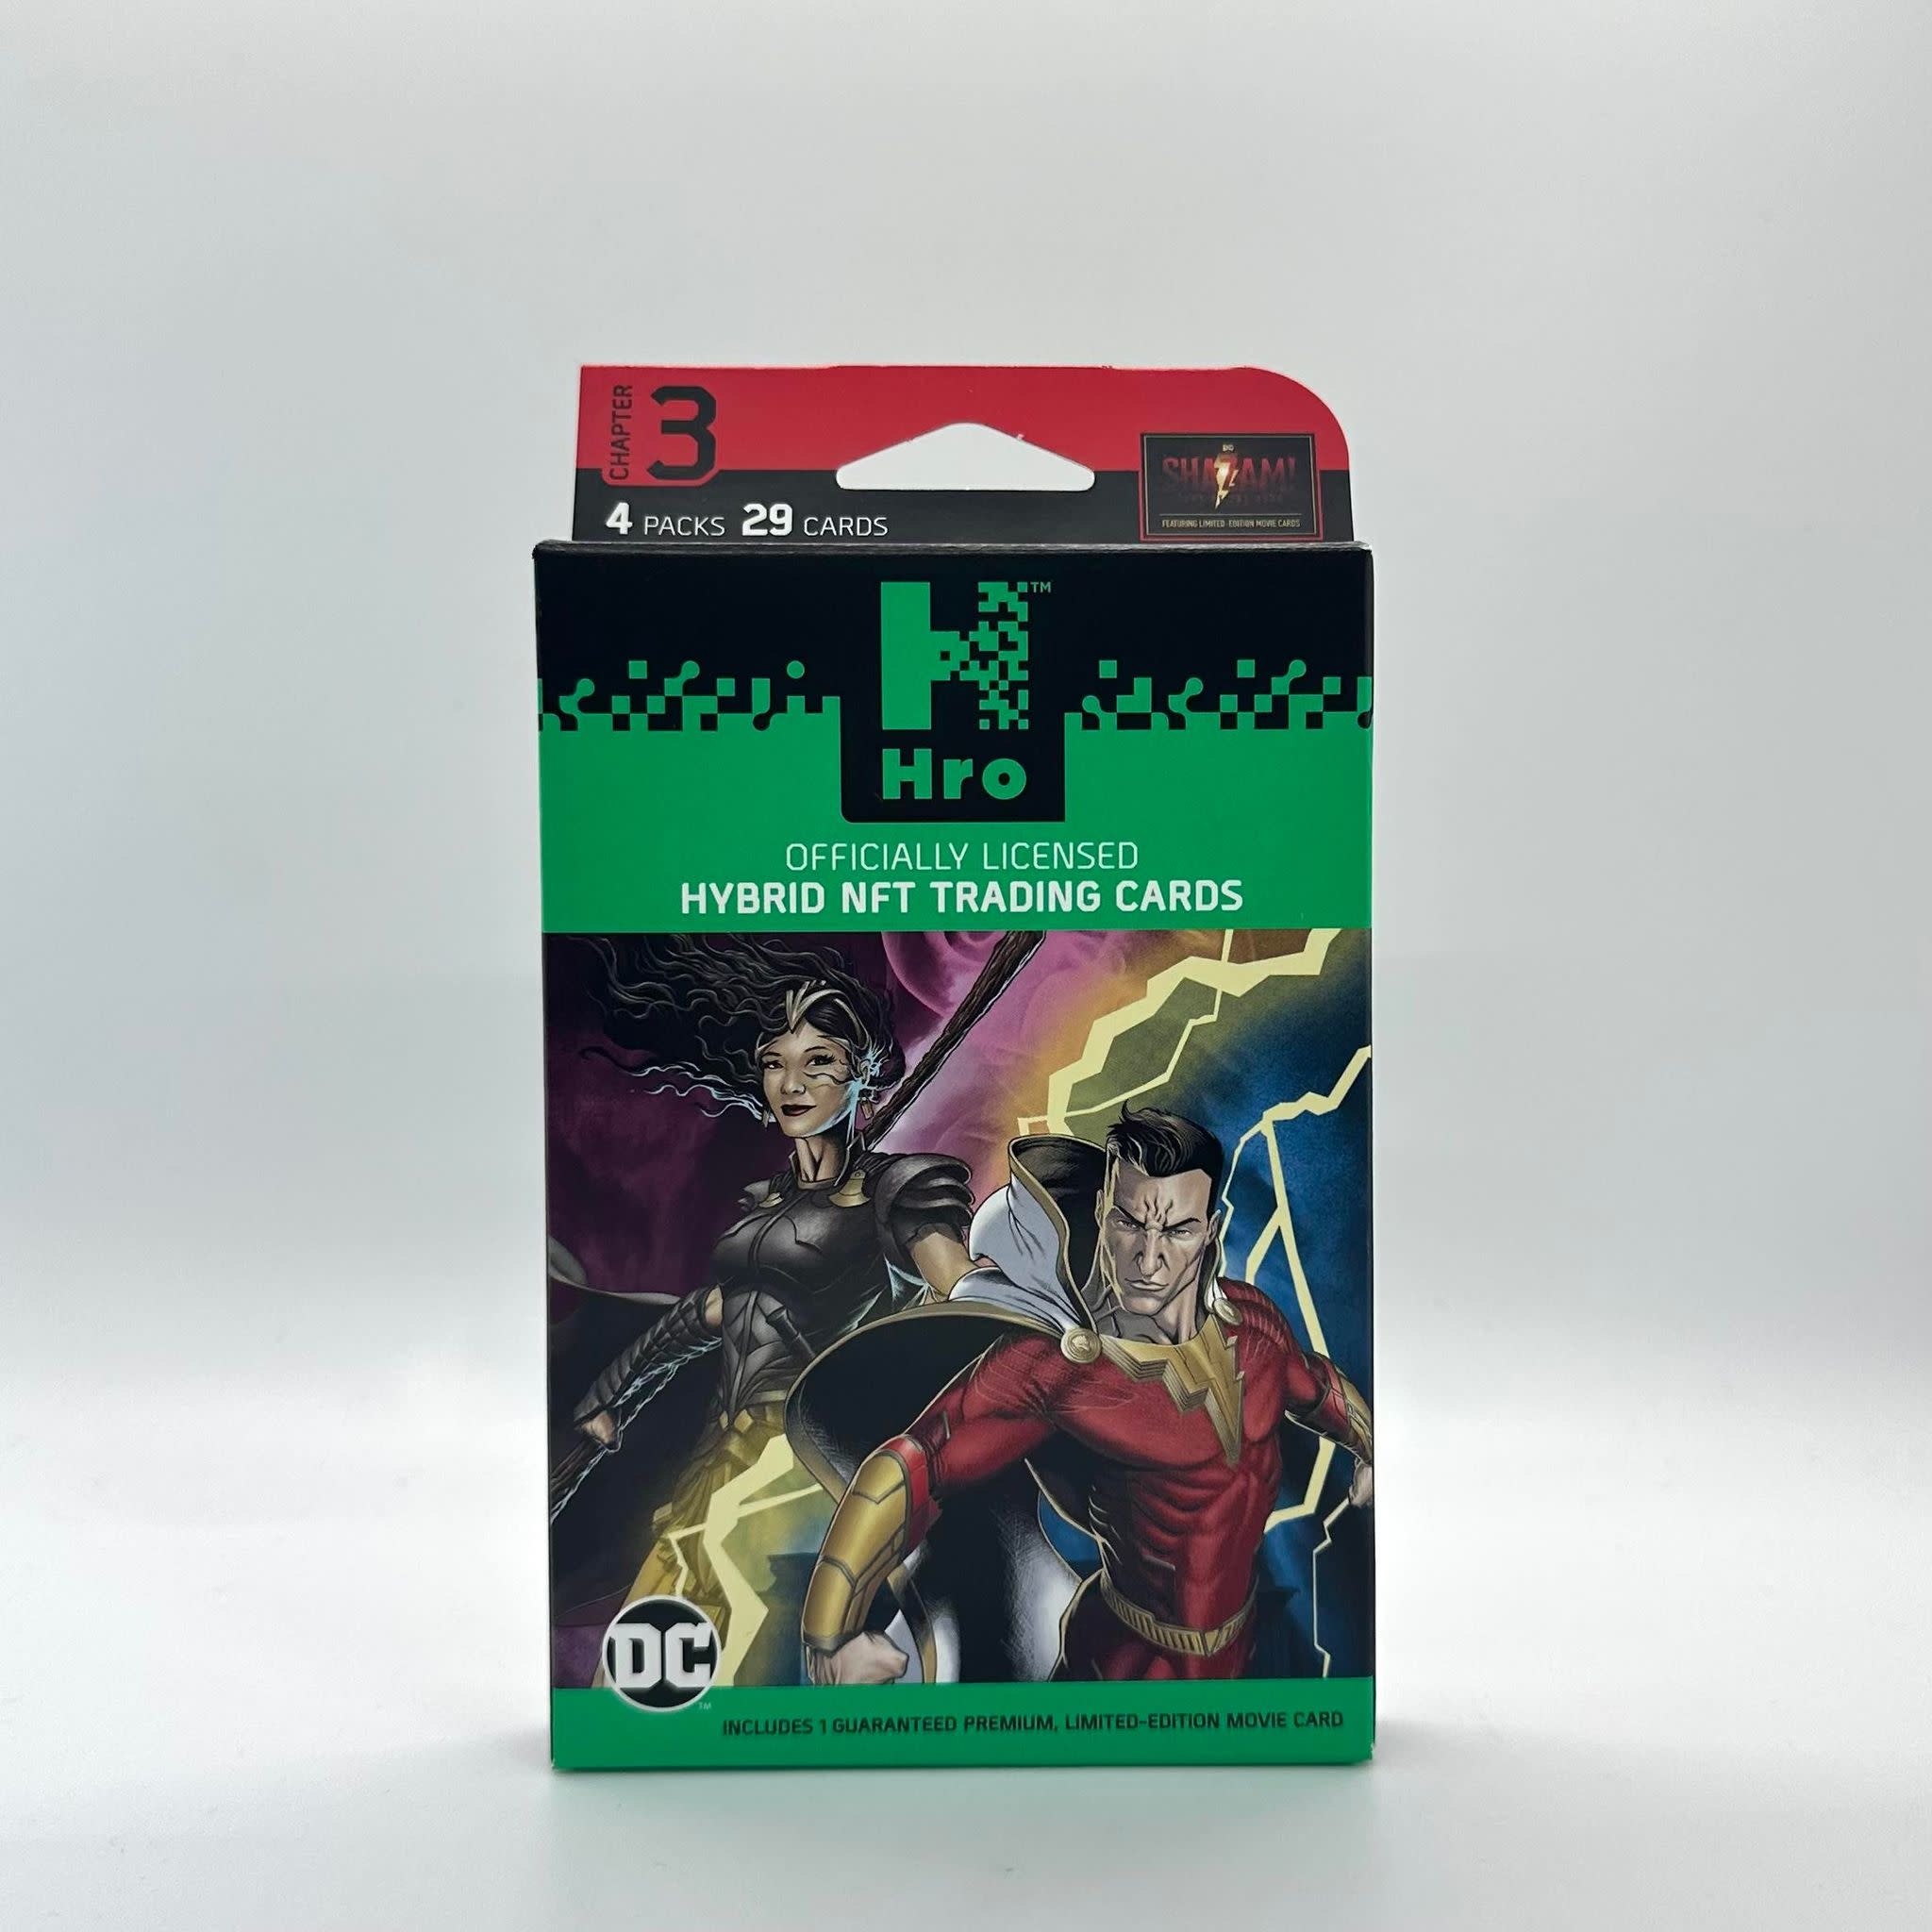 DC Heroes & Villains - Unlock exclusive rewards with the Justice